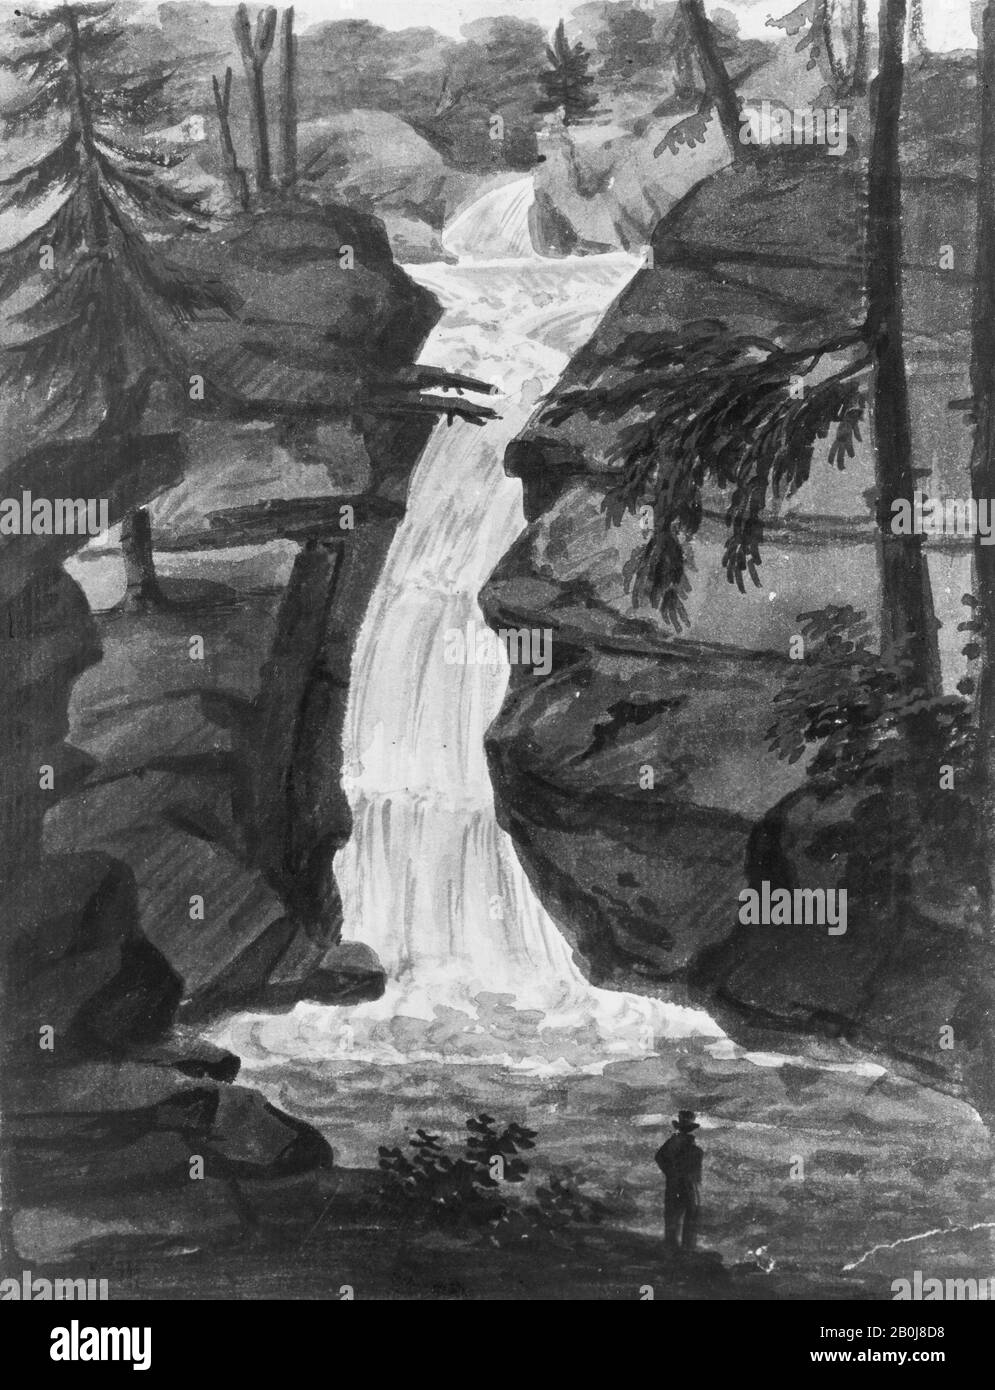 Pavel Petrovich Svinin, Upper Falls of Solomon's Creek (after an Engraving in The Port Folio Magazine, December 1809), American, Pavel Petrovich Svinin (1787/88–1839), 1811–ca. 1813, American, Watercolor and gouache on white laid paper, 7 1/8 x 5 3/8 in. (18.1 x 13.7 cm), Drawings Stock Photo